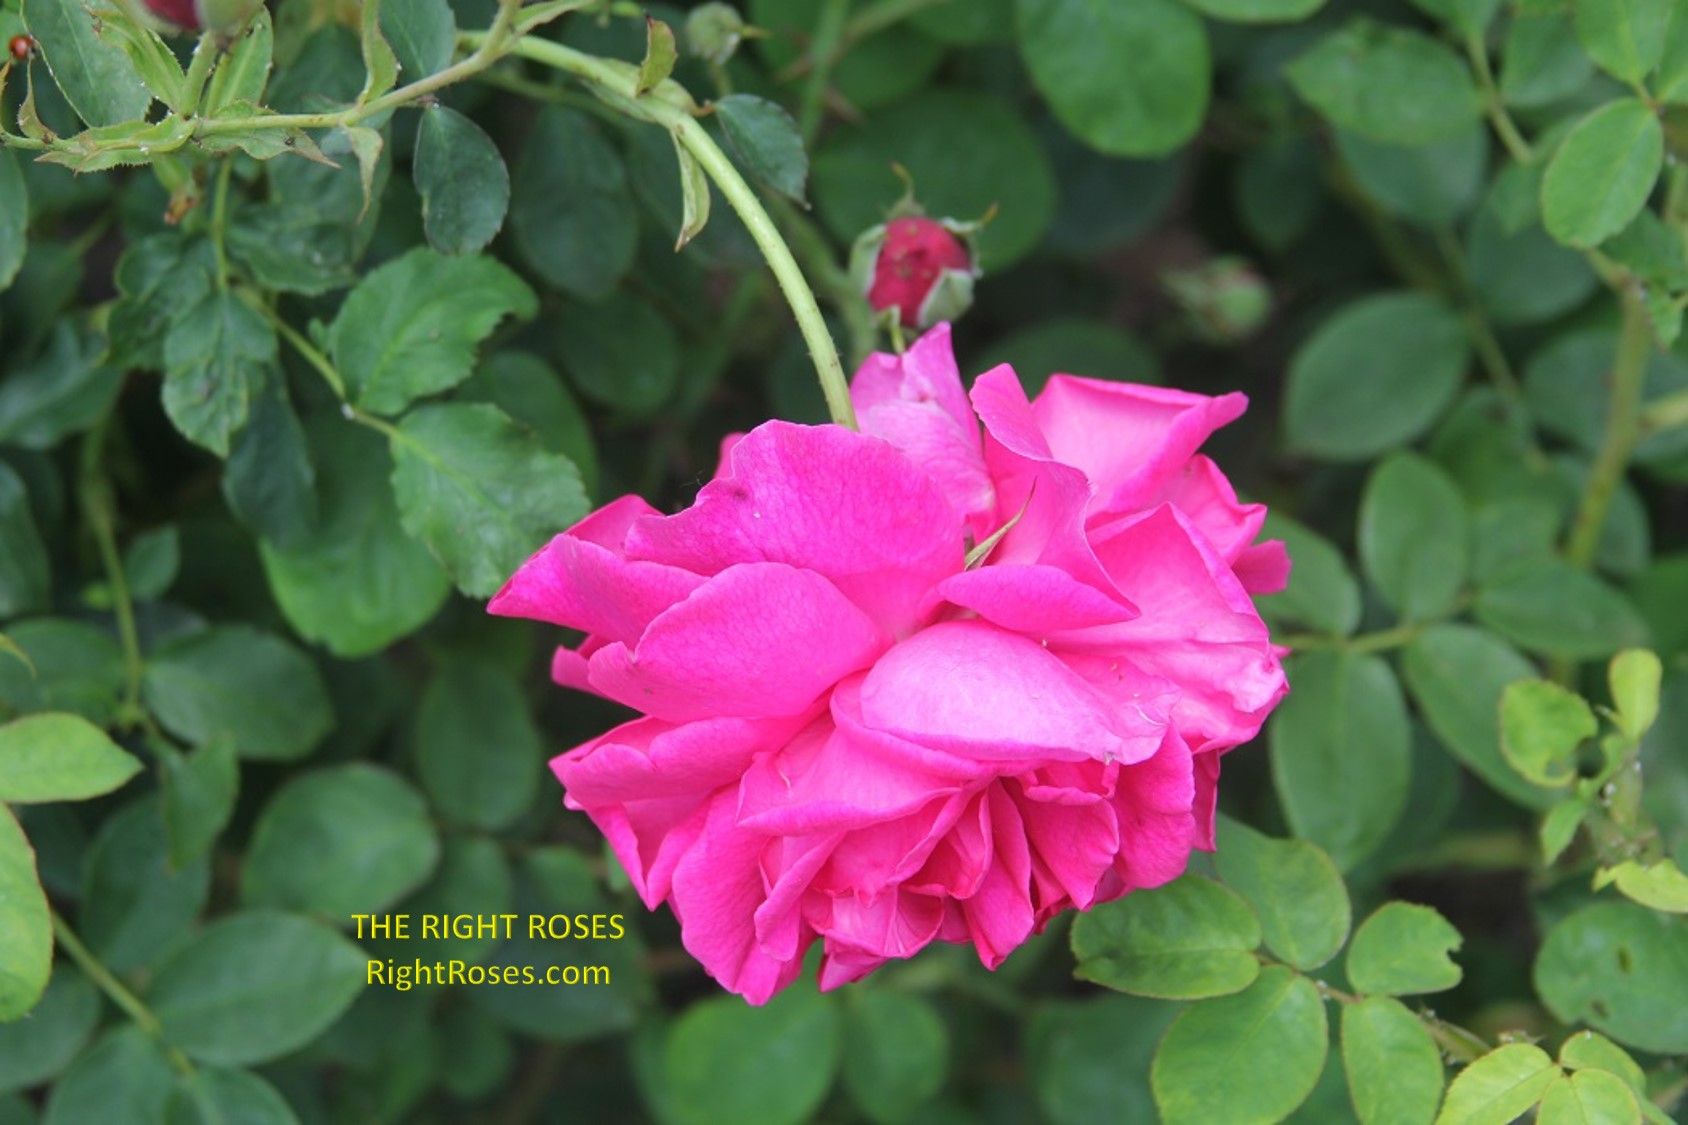 thomas a becket rose review the right roses score best top garden store david austin english roses rose products rose rating the right leap rose food fertilizer